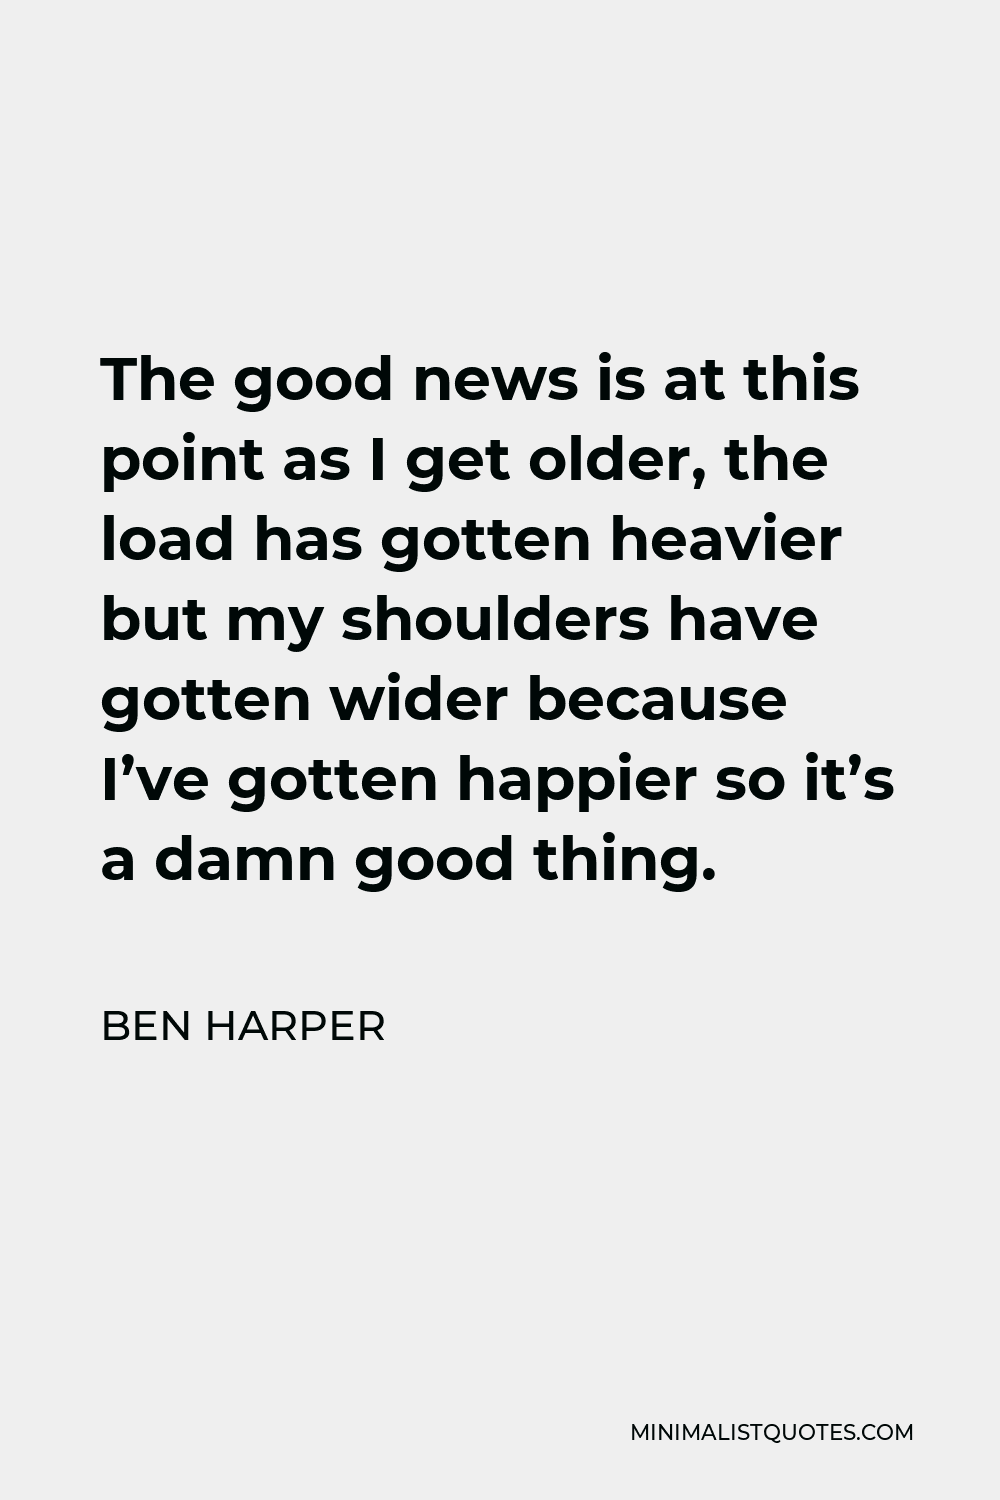 Ben Harper Quote - The good news is at this point as I get older, the load has gotten heavier but my shoulders have gotten wider because I’ve gotten happier so it’s a damn good thing.